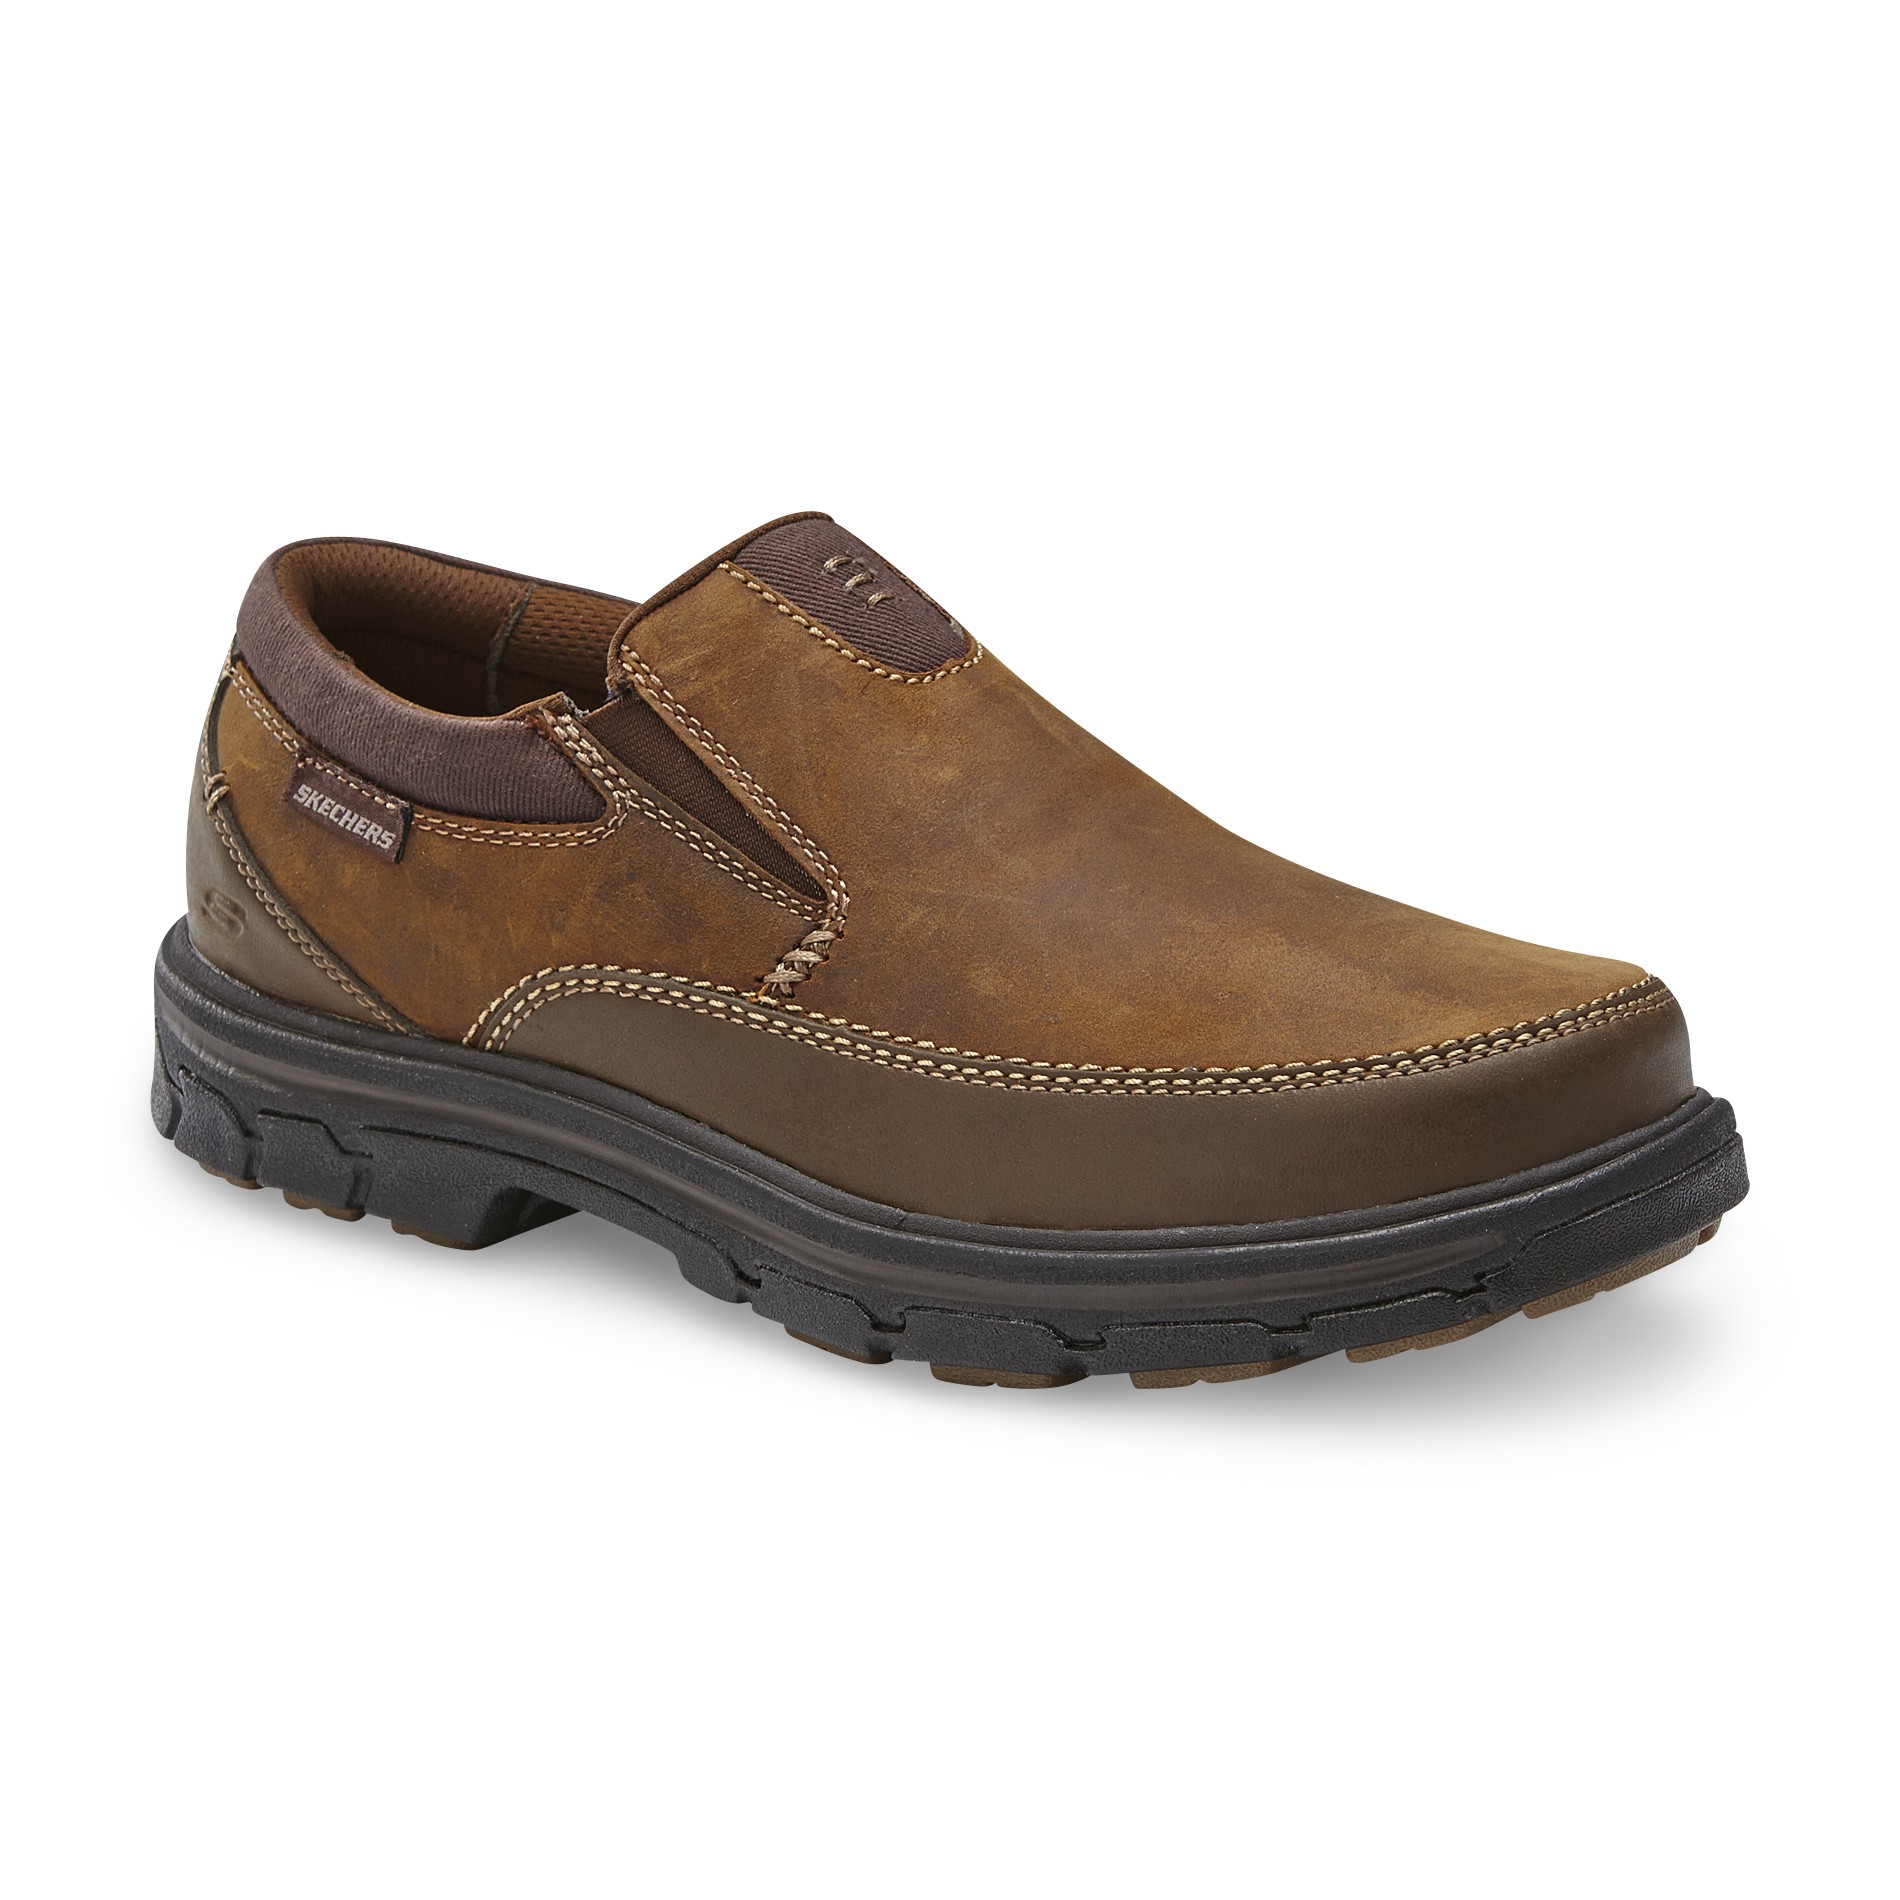 Skechers Men S The Search Relaxed Fit Leather Loafer Brown